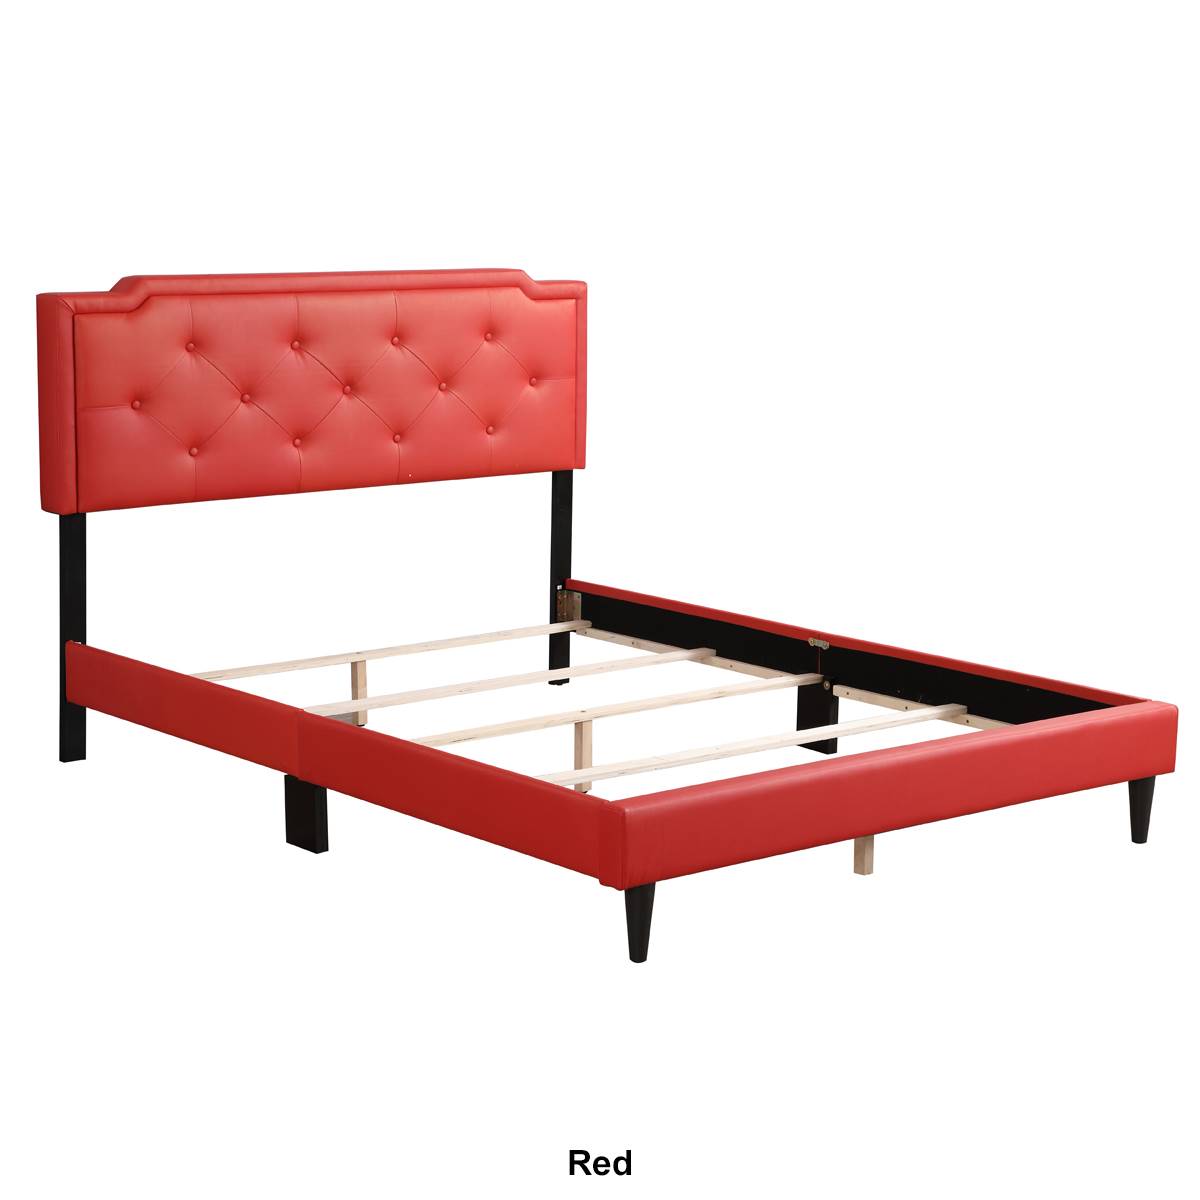 Passion Furniture Deb Jewel Tufted Panel Bed Frame - Queen